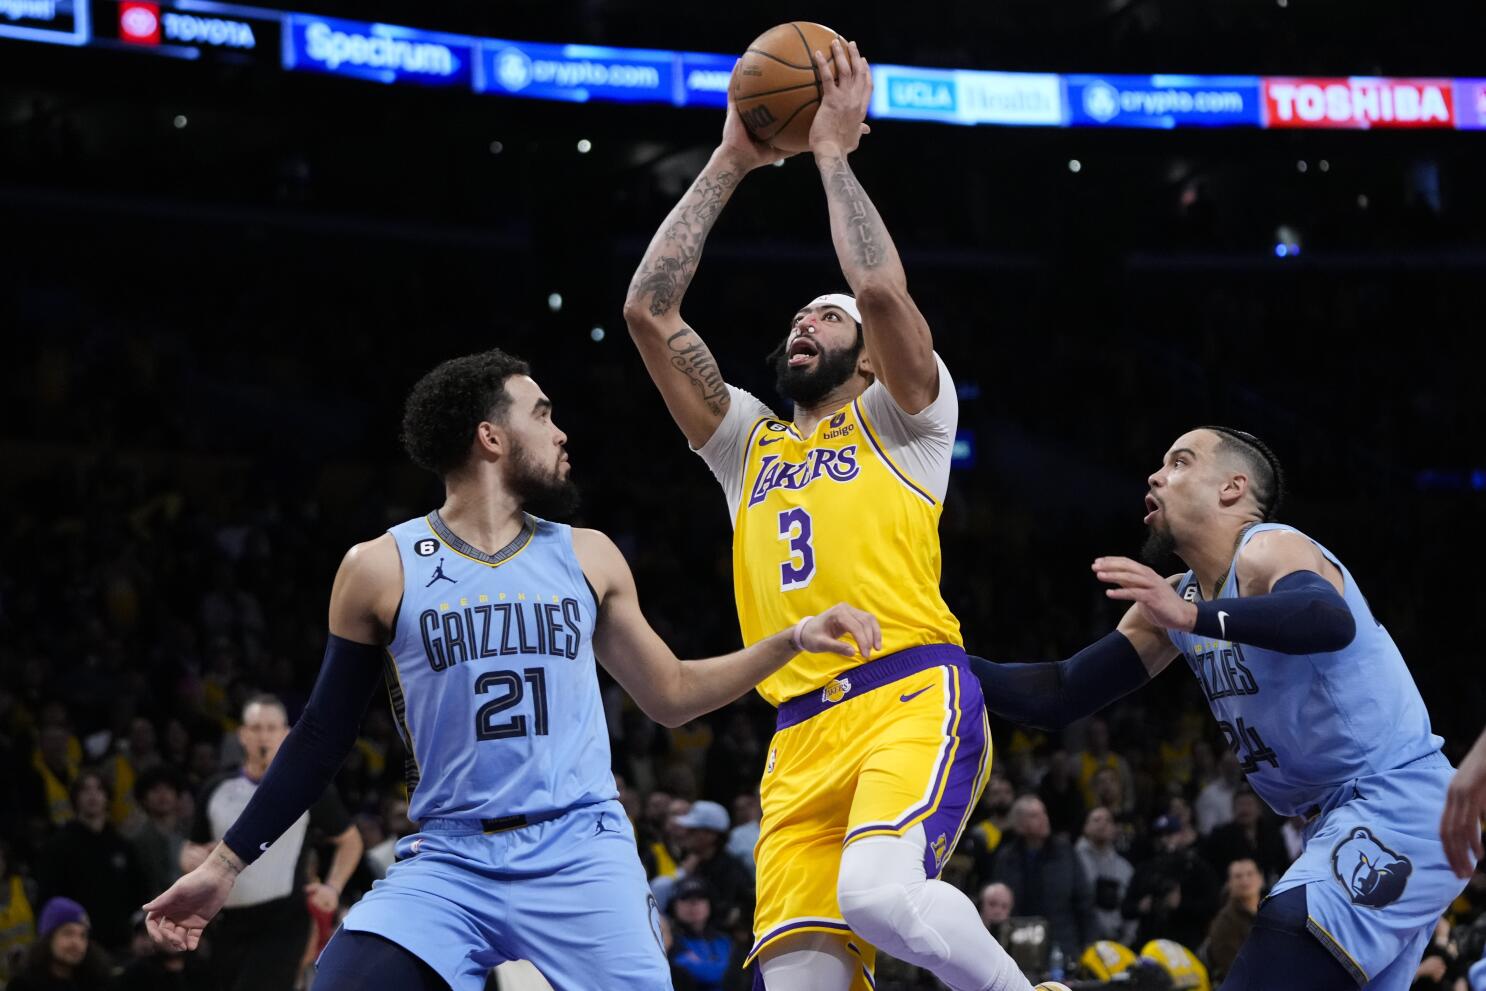 Lakers Vs. Grizzlies: L.A. Has 2-Game Win Streak Snapped By